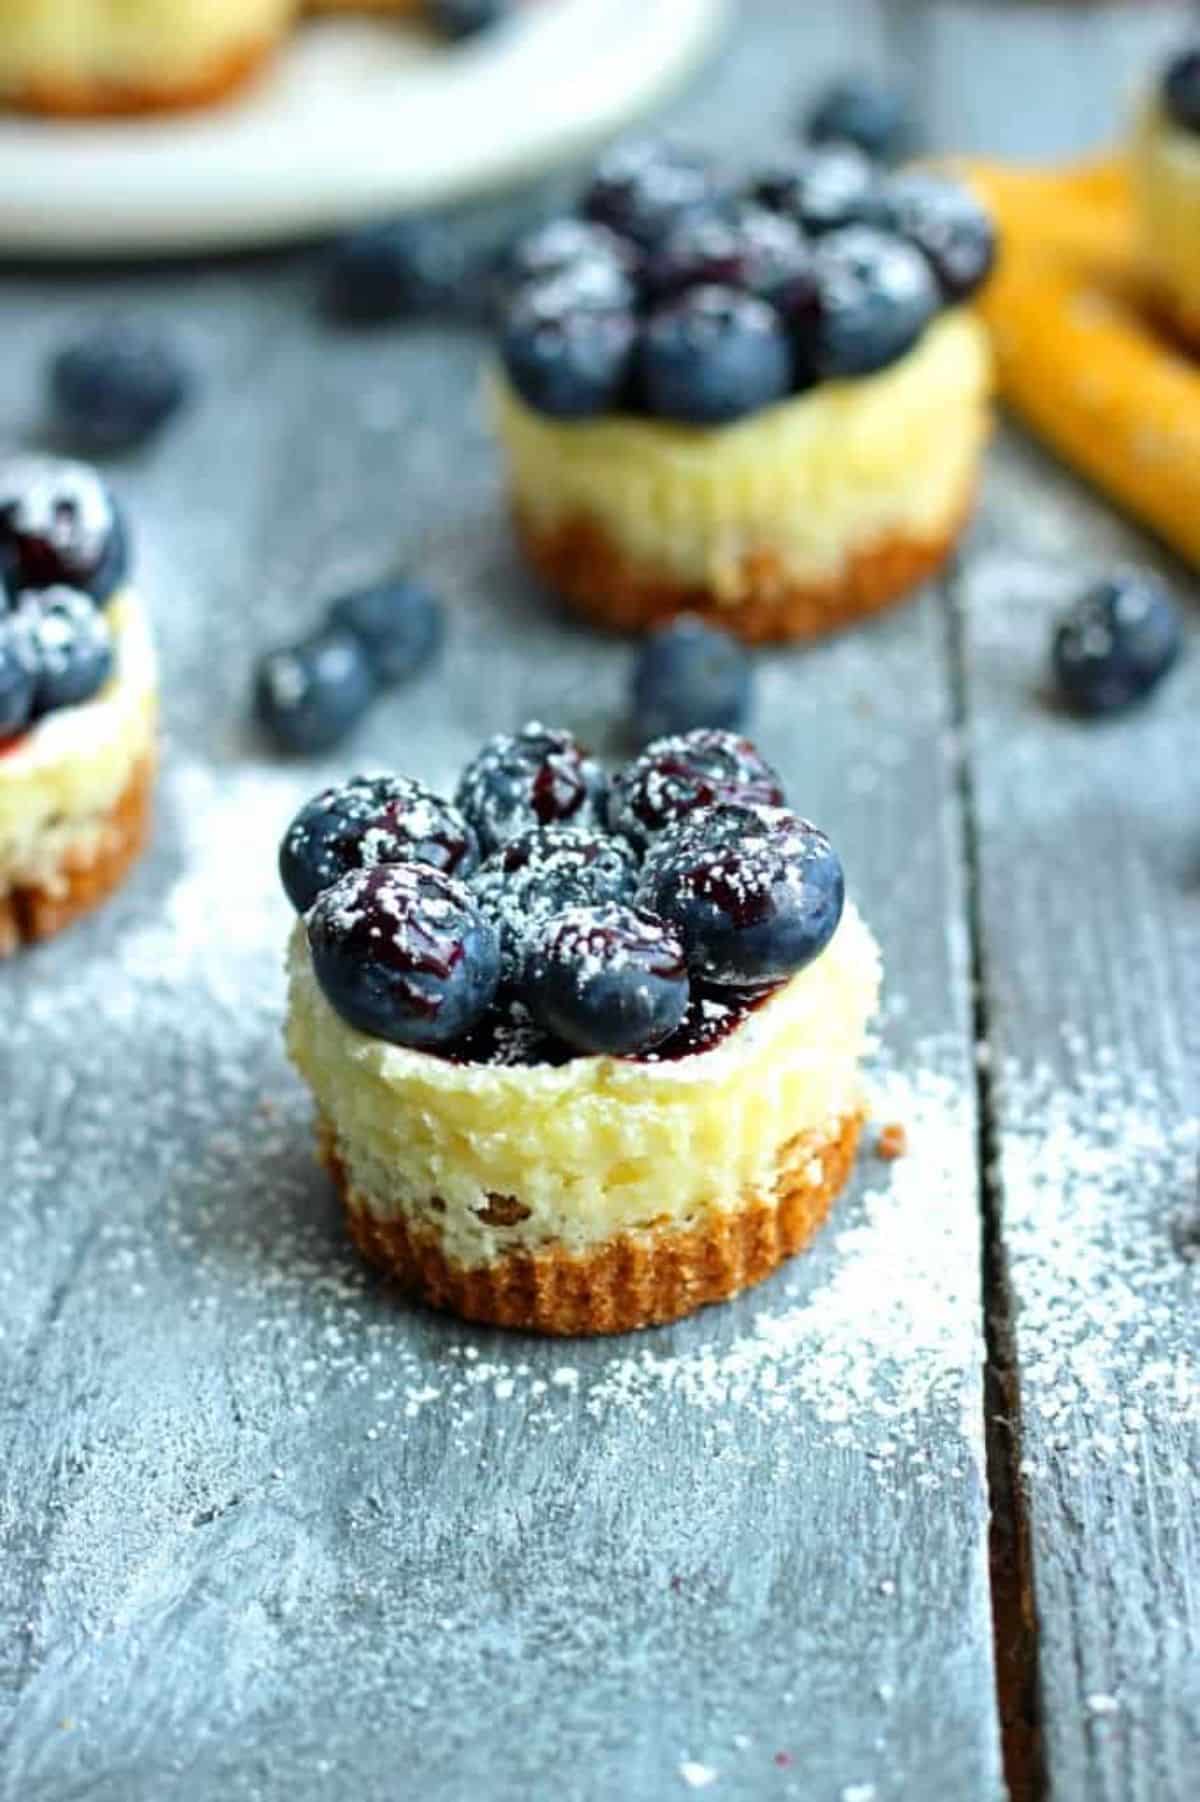 Scrumptious blueberry cheesecakes on a wooden table.